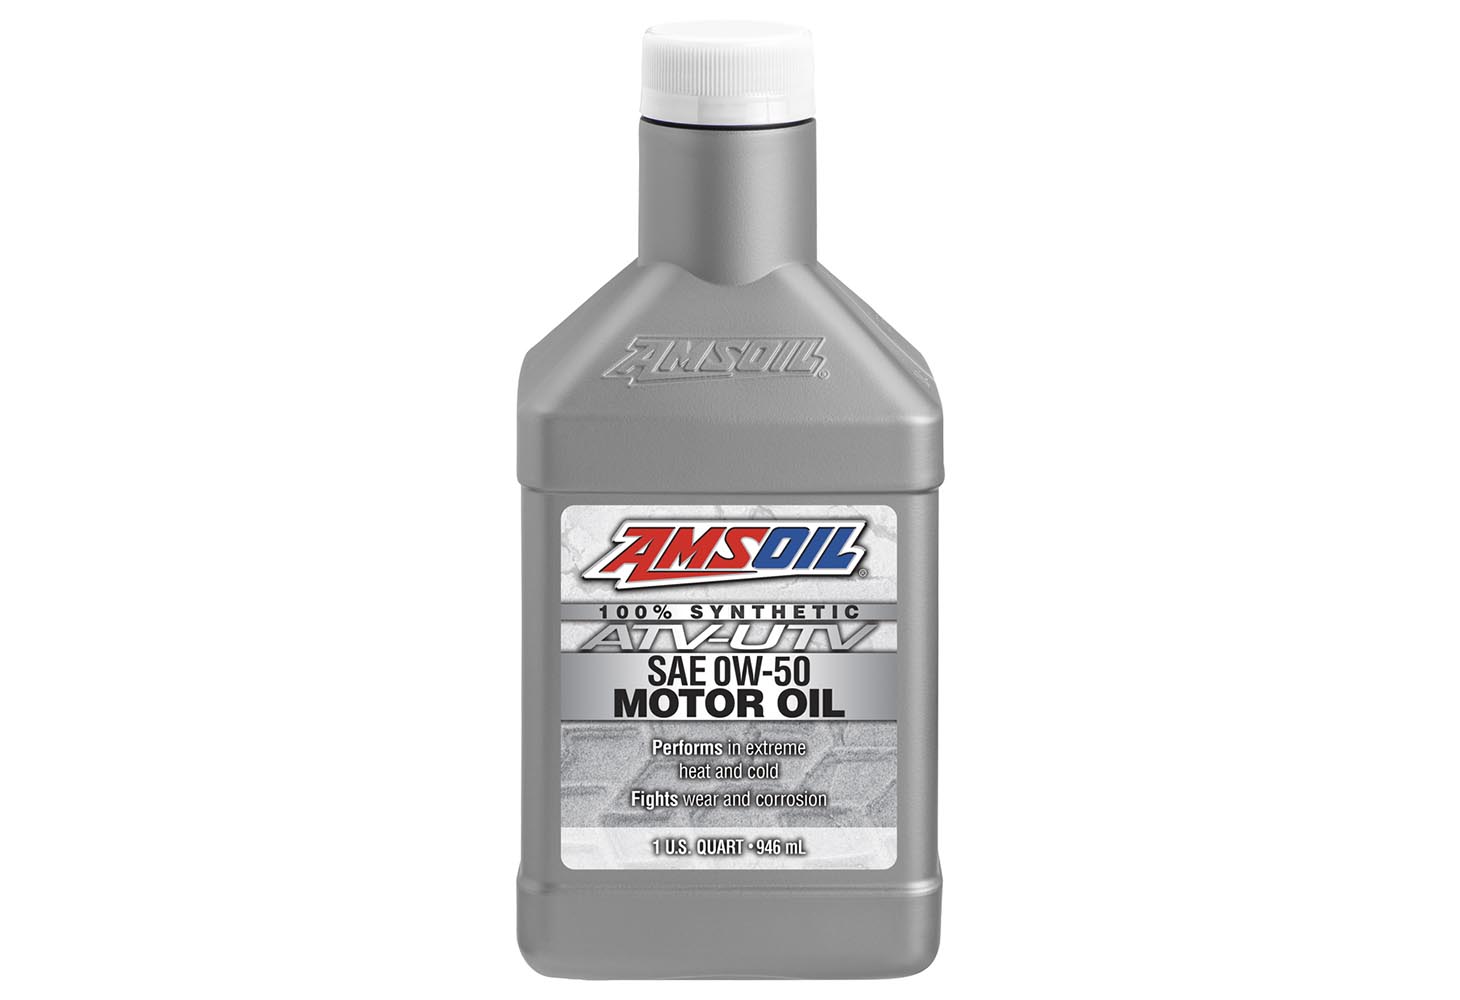 AMSOIL adds new ultra-low viscosity grade to motor oil line